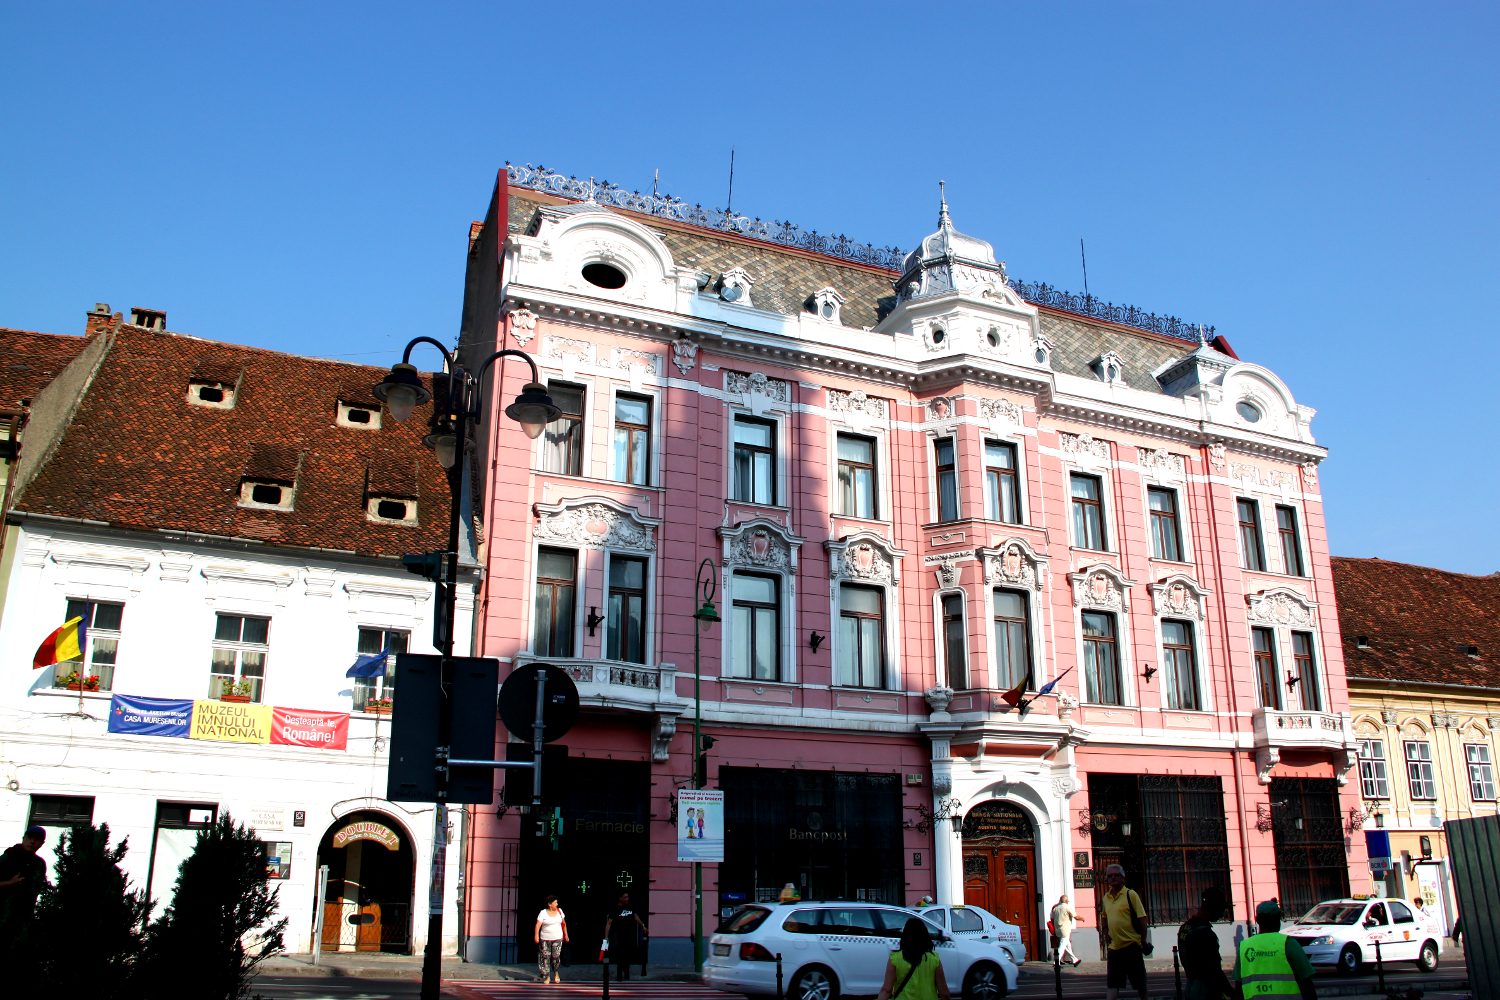 Brasov - The National Bank of Romania’s branch and The National Anthem Museum (Casa Muresenilor)